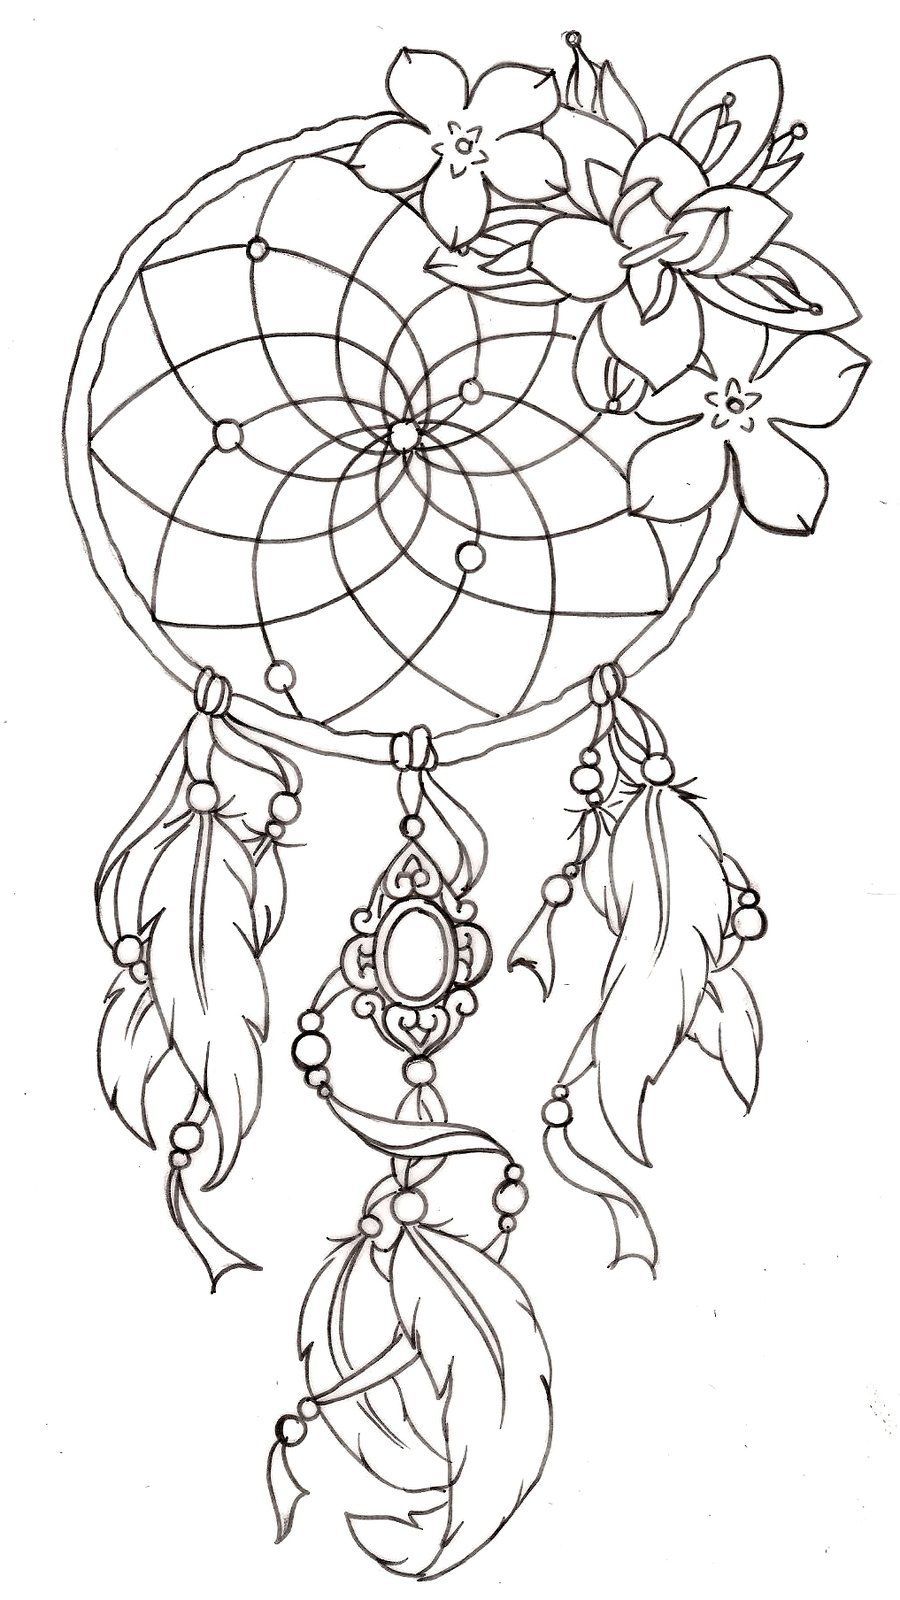 Dream Catcher Tattoo. Sooome day !!  This gives me more ideas for mine !! I neve